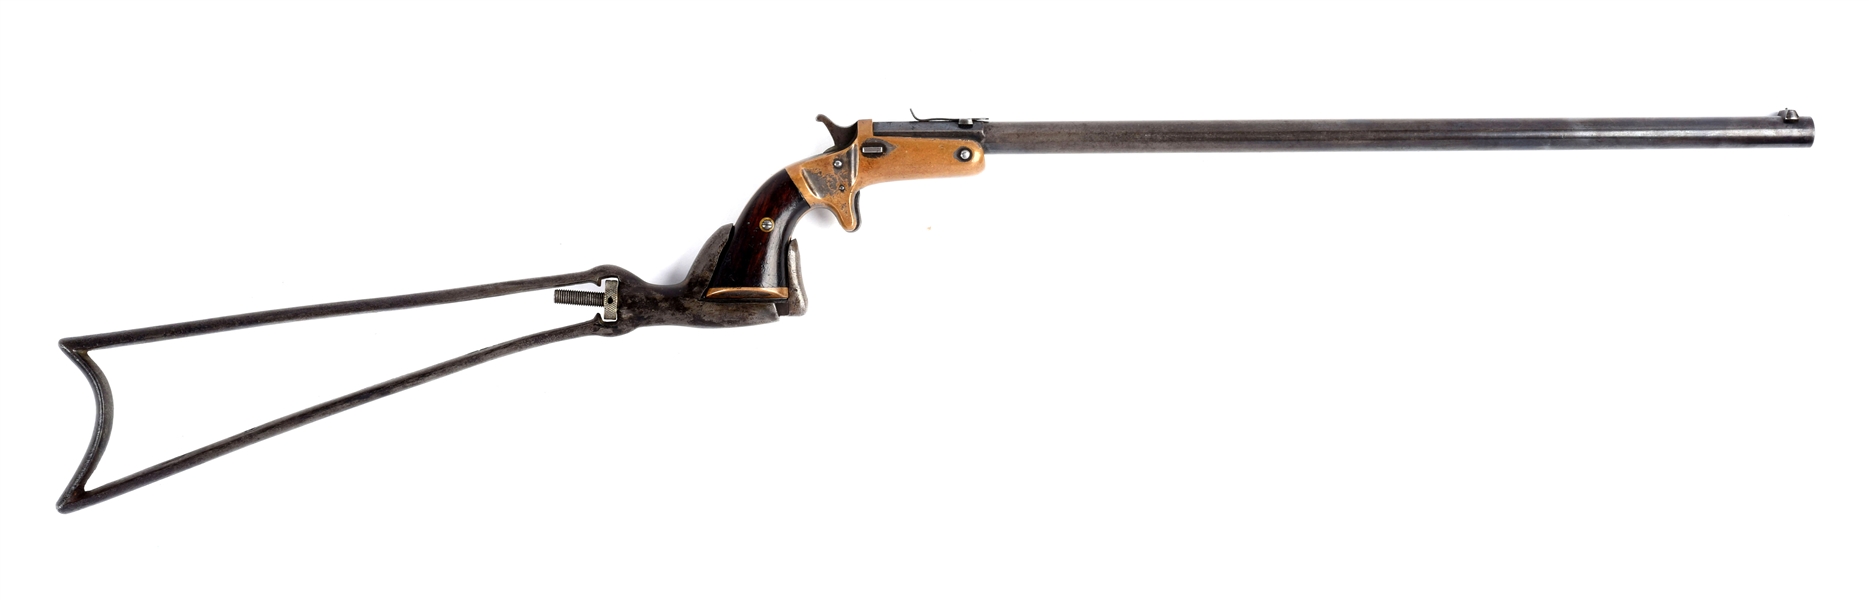 (A) STEVEN NEW MODEL POCKET RIFLE WITH DETACHABLE STOCK.